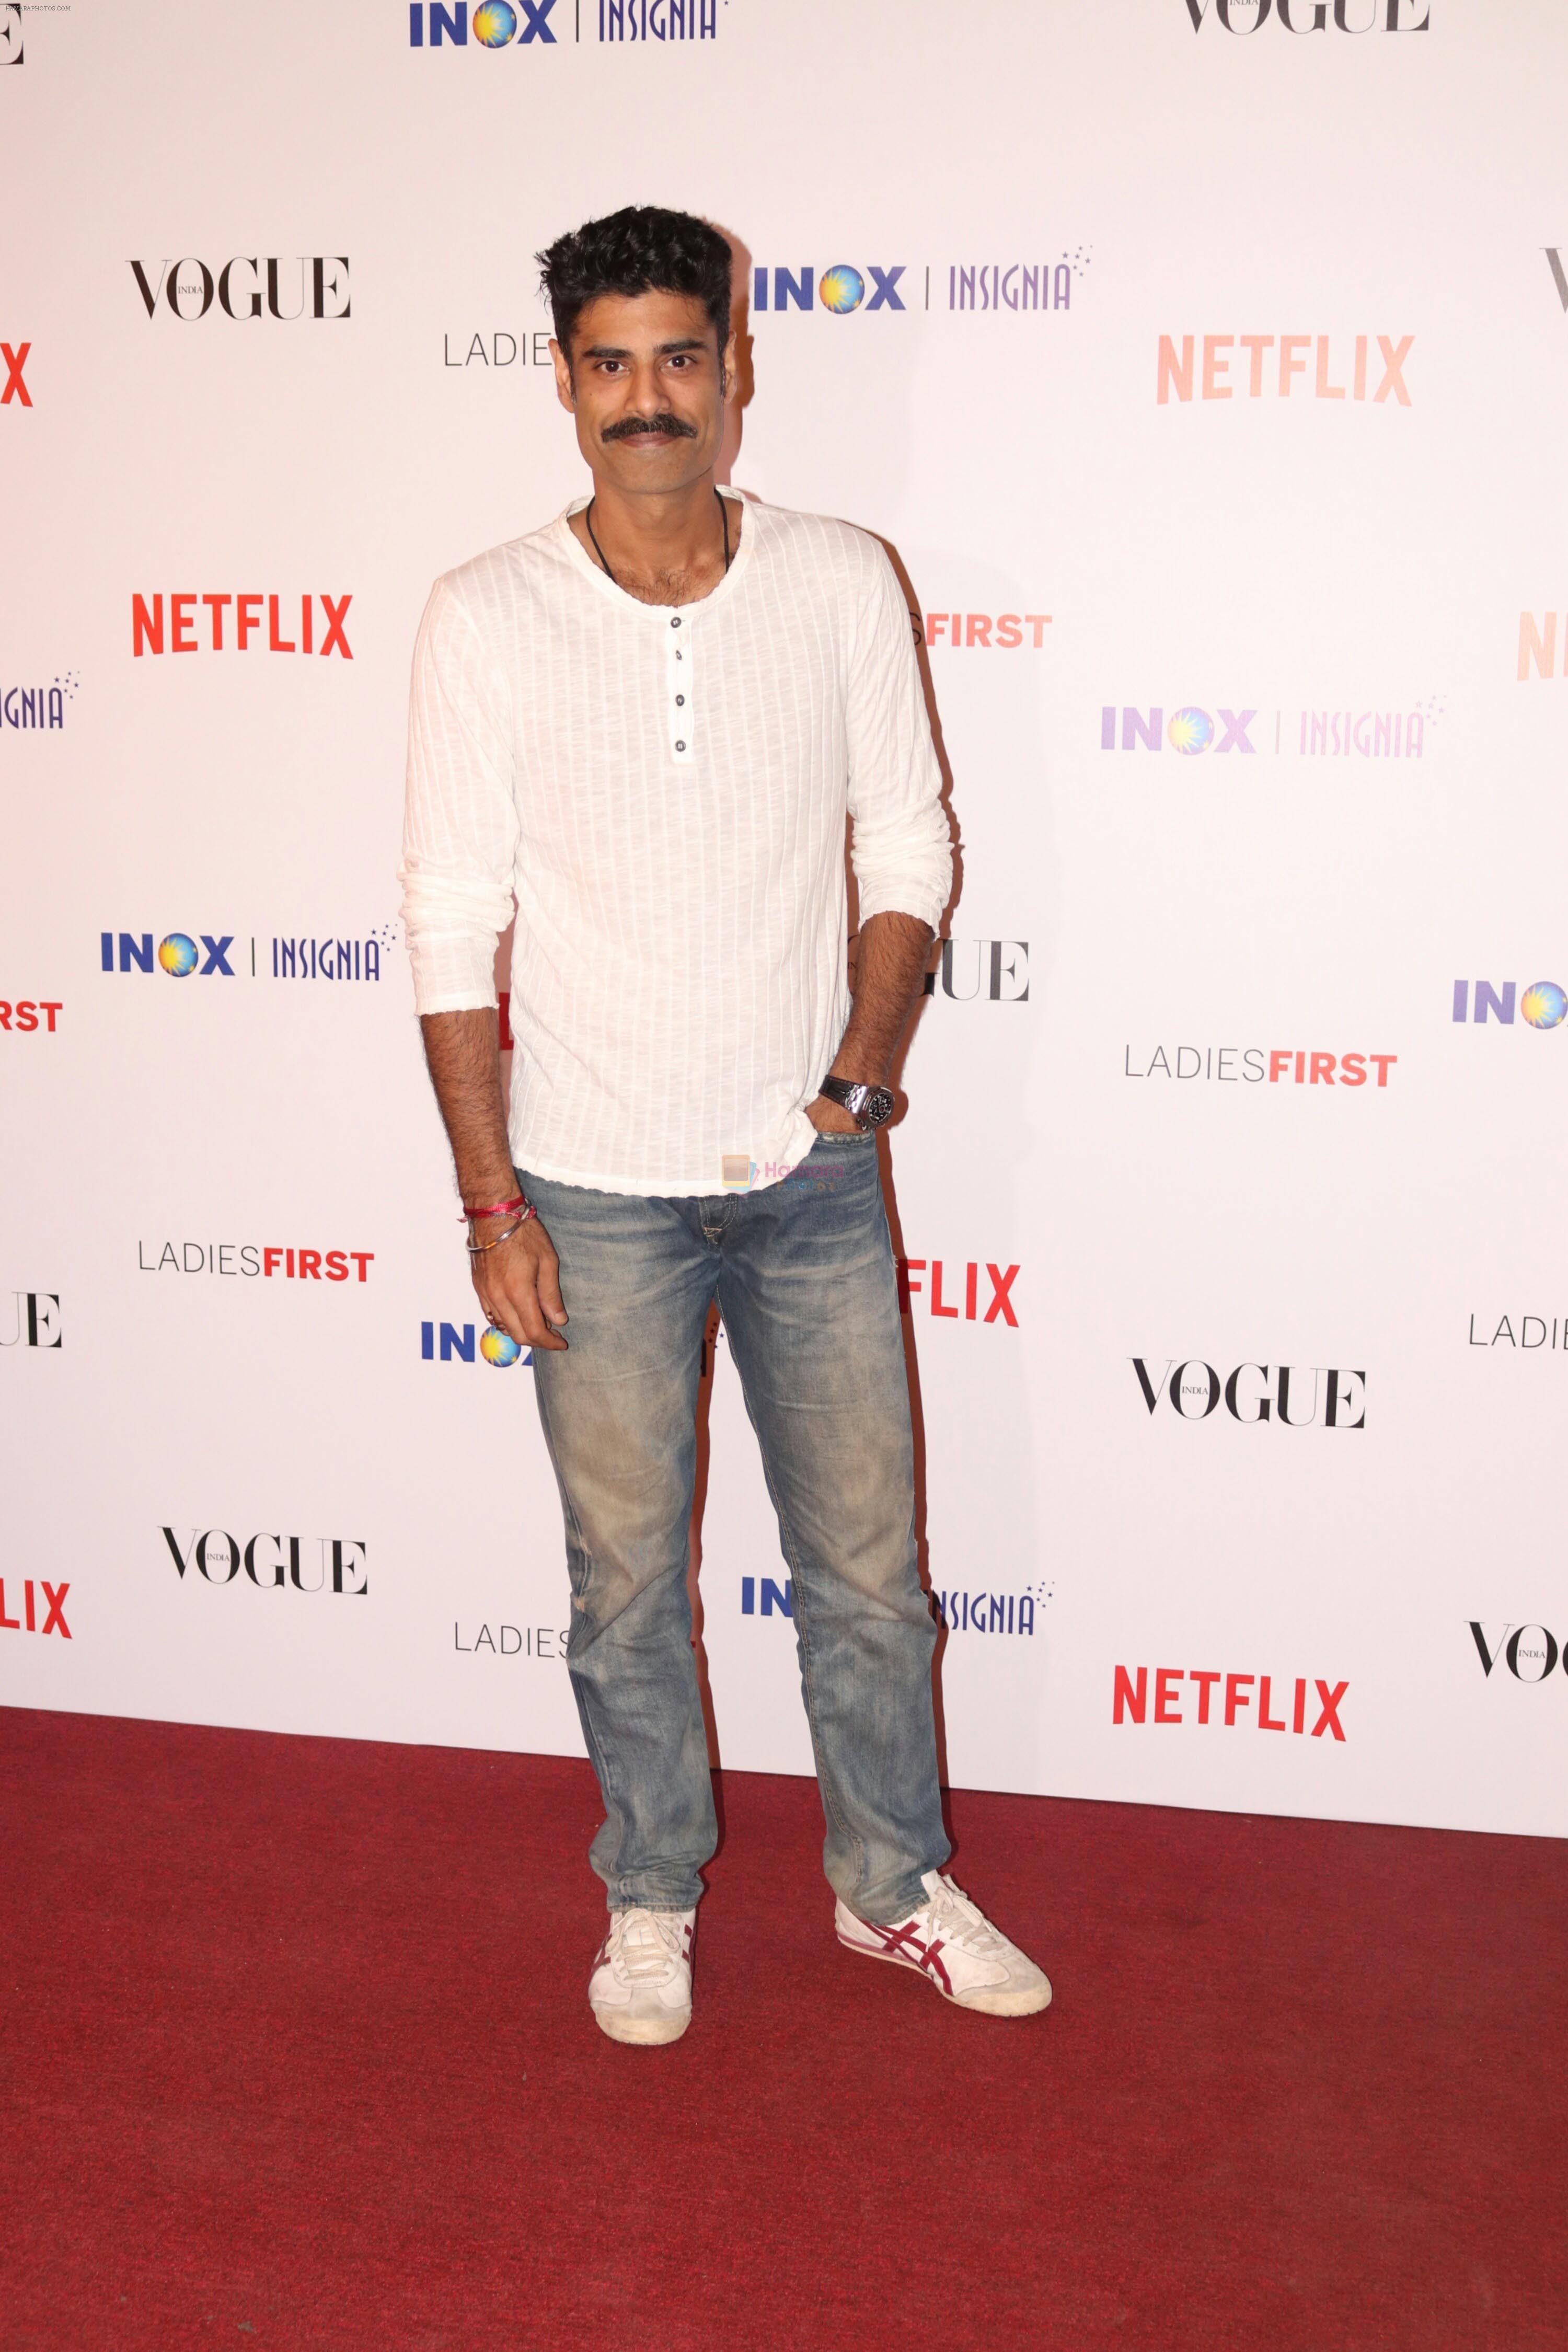 Sikander Kher at the Premier of _Ladies First_- The First Original Netflix Documentary that chronicles the life of World No 1 Archer, Deepika Kumari on 8th March 2018